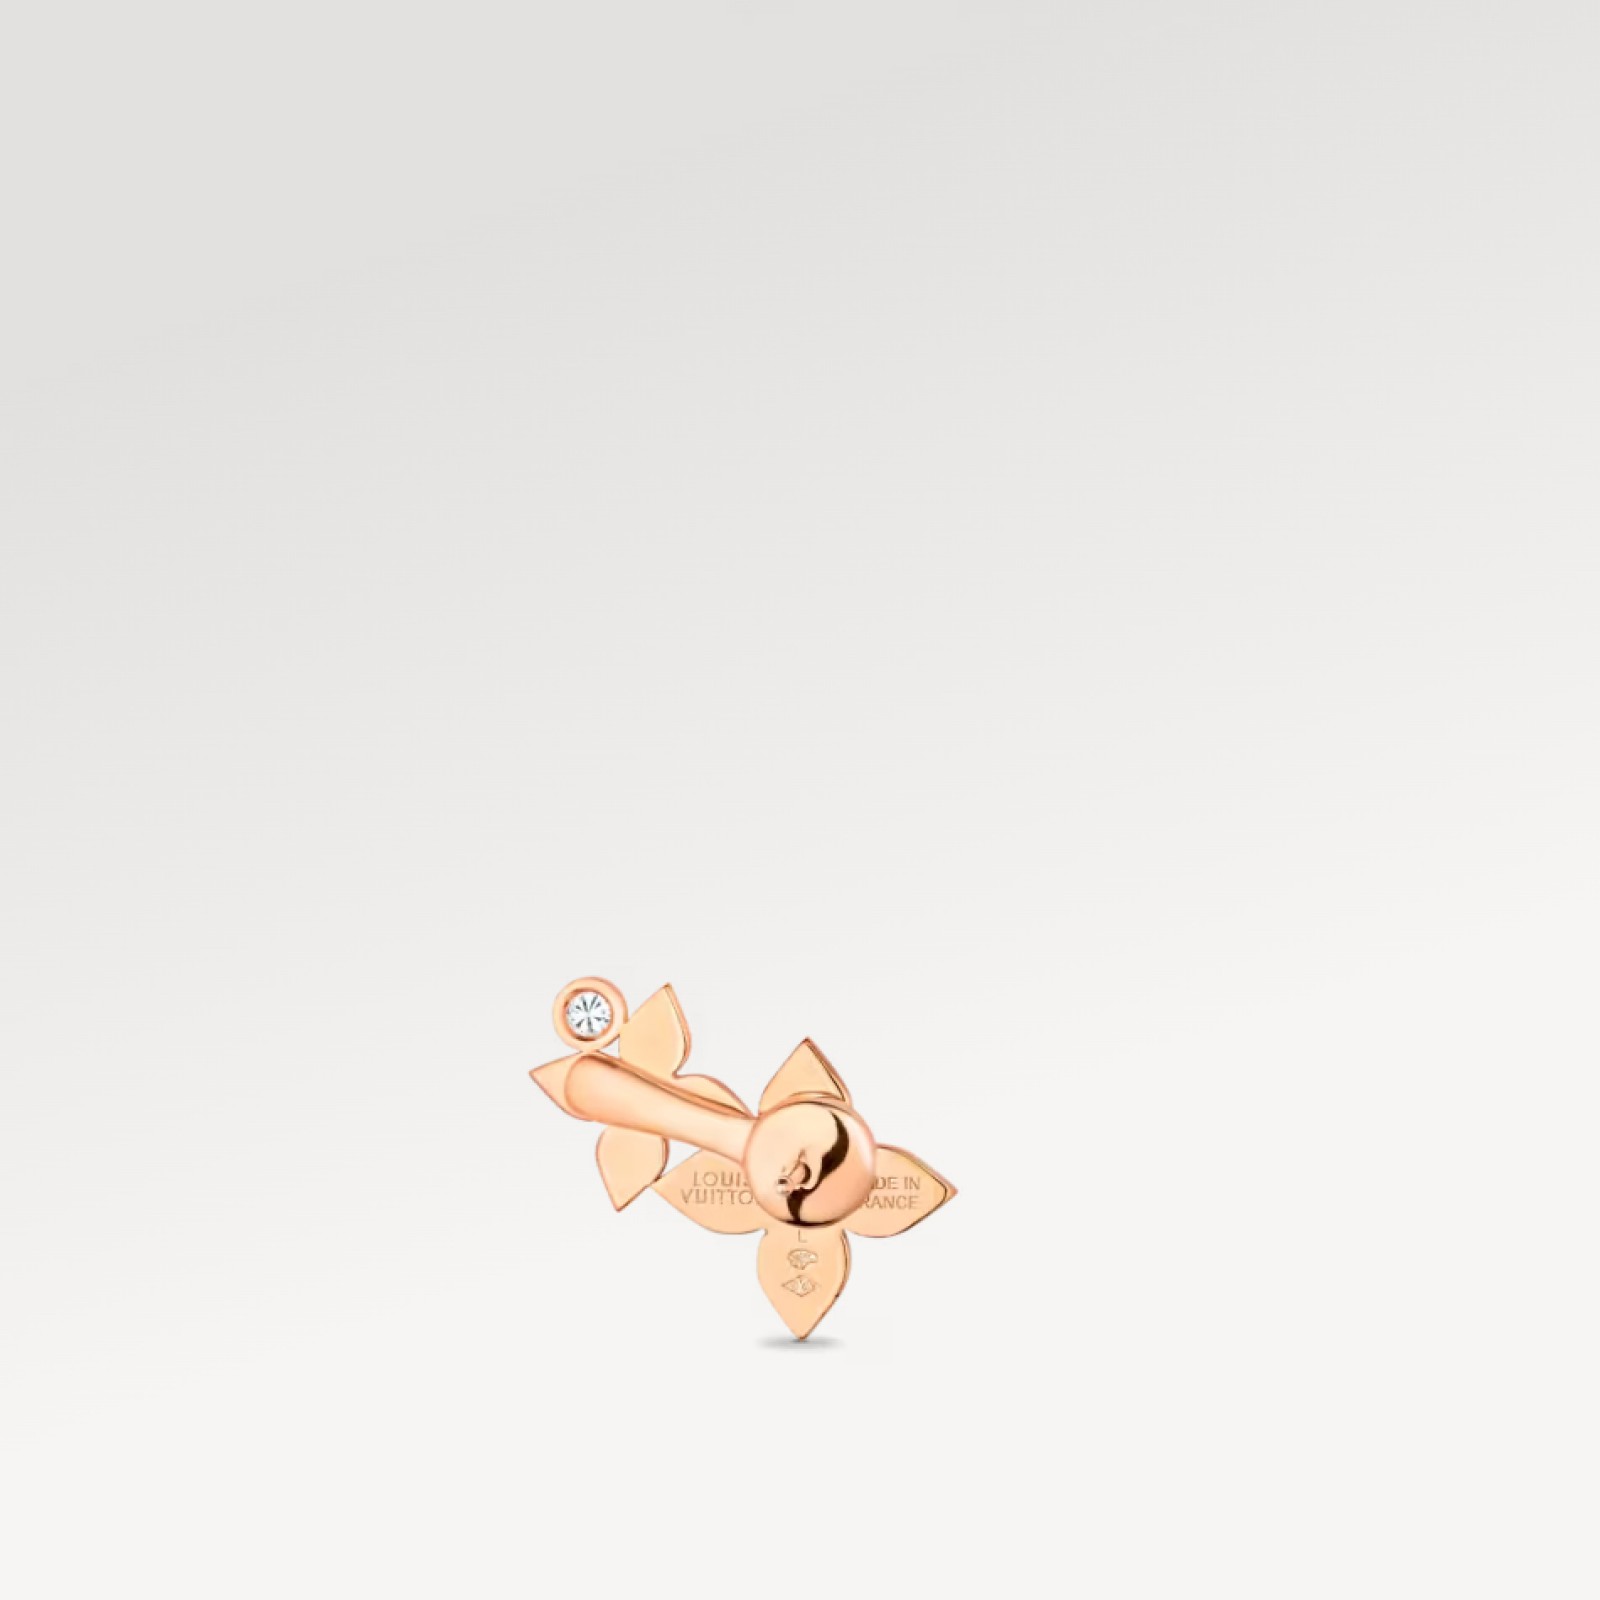 Idylle Blossom Left Earring, Pink Gold And Diamonds - Per Unit